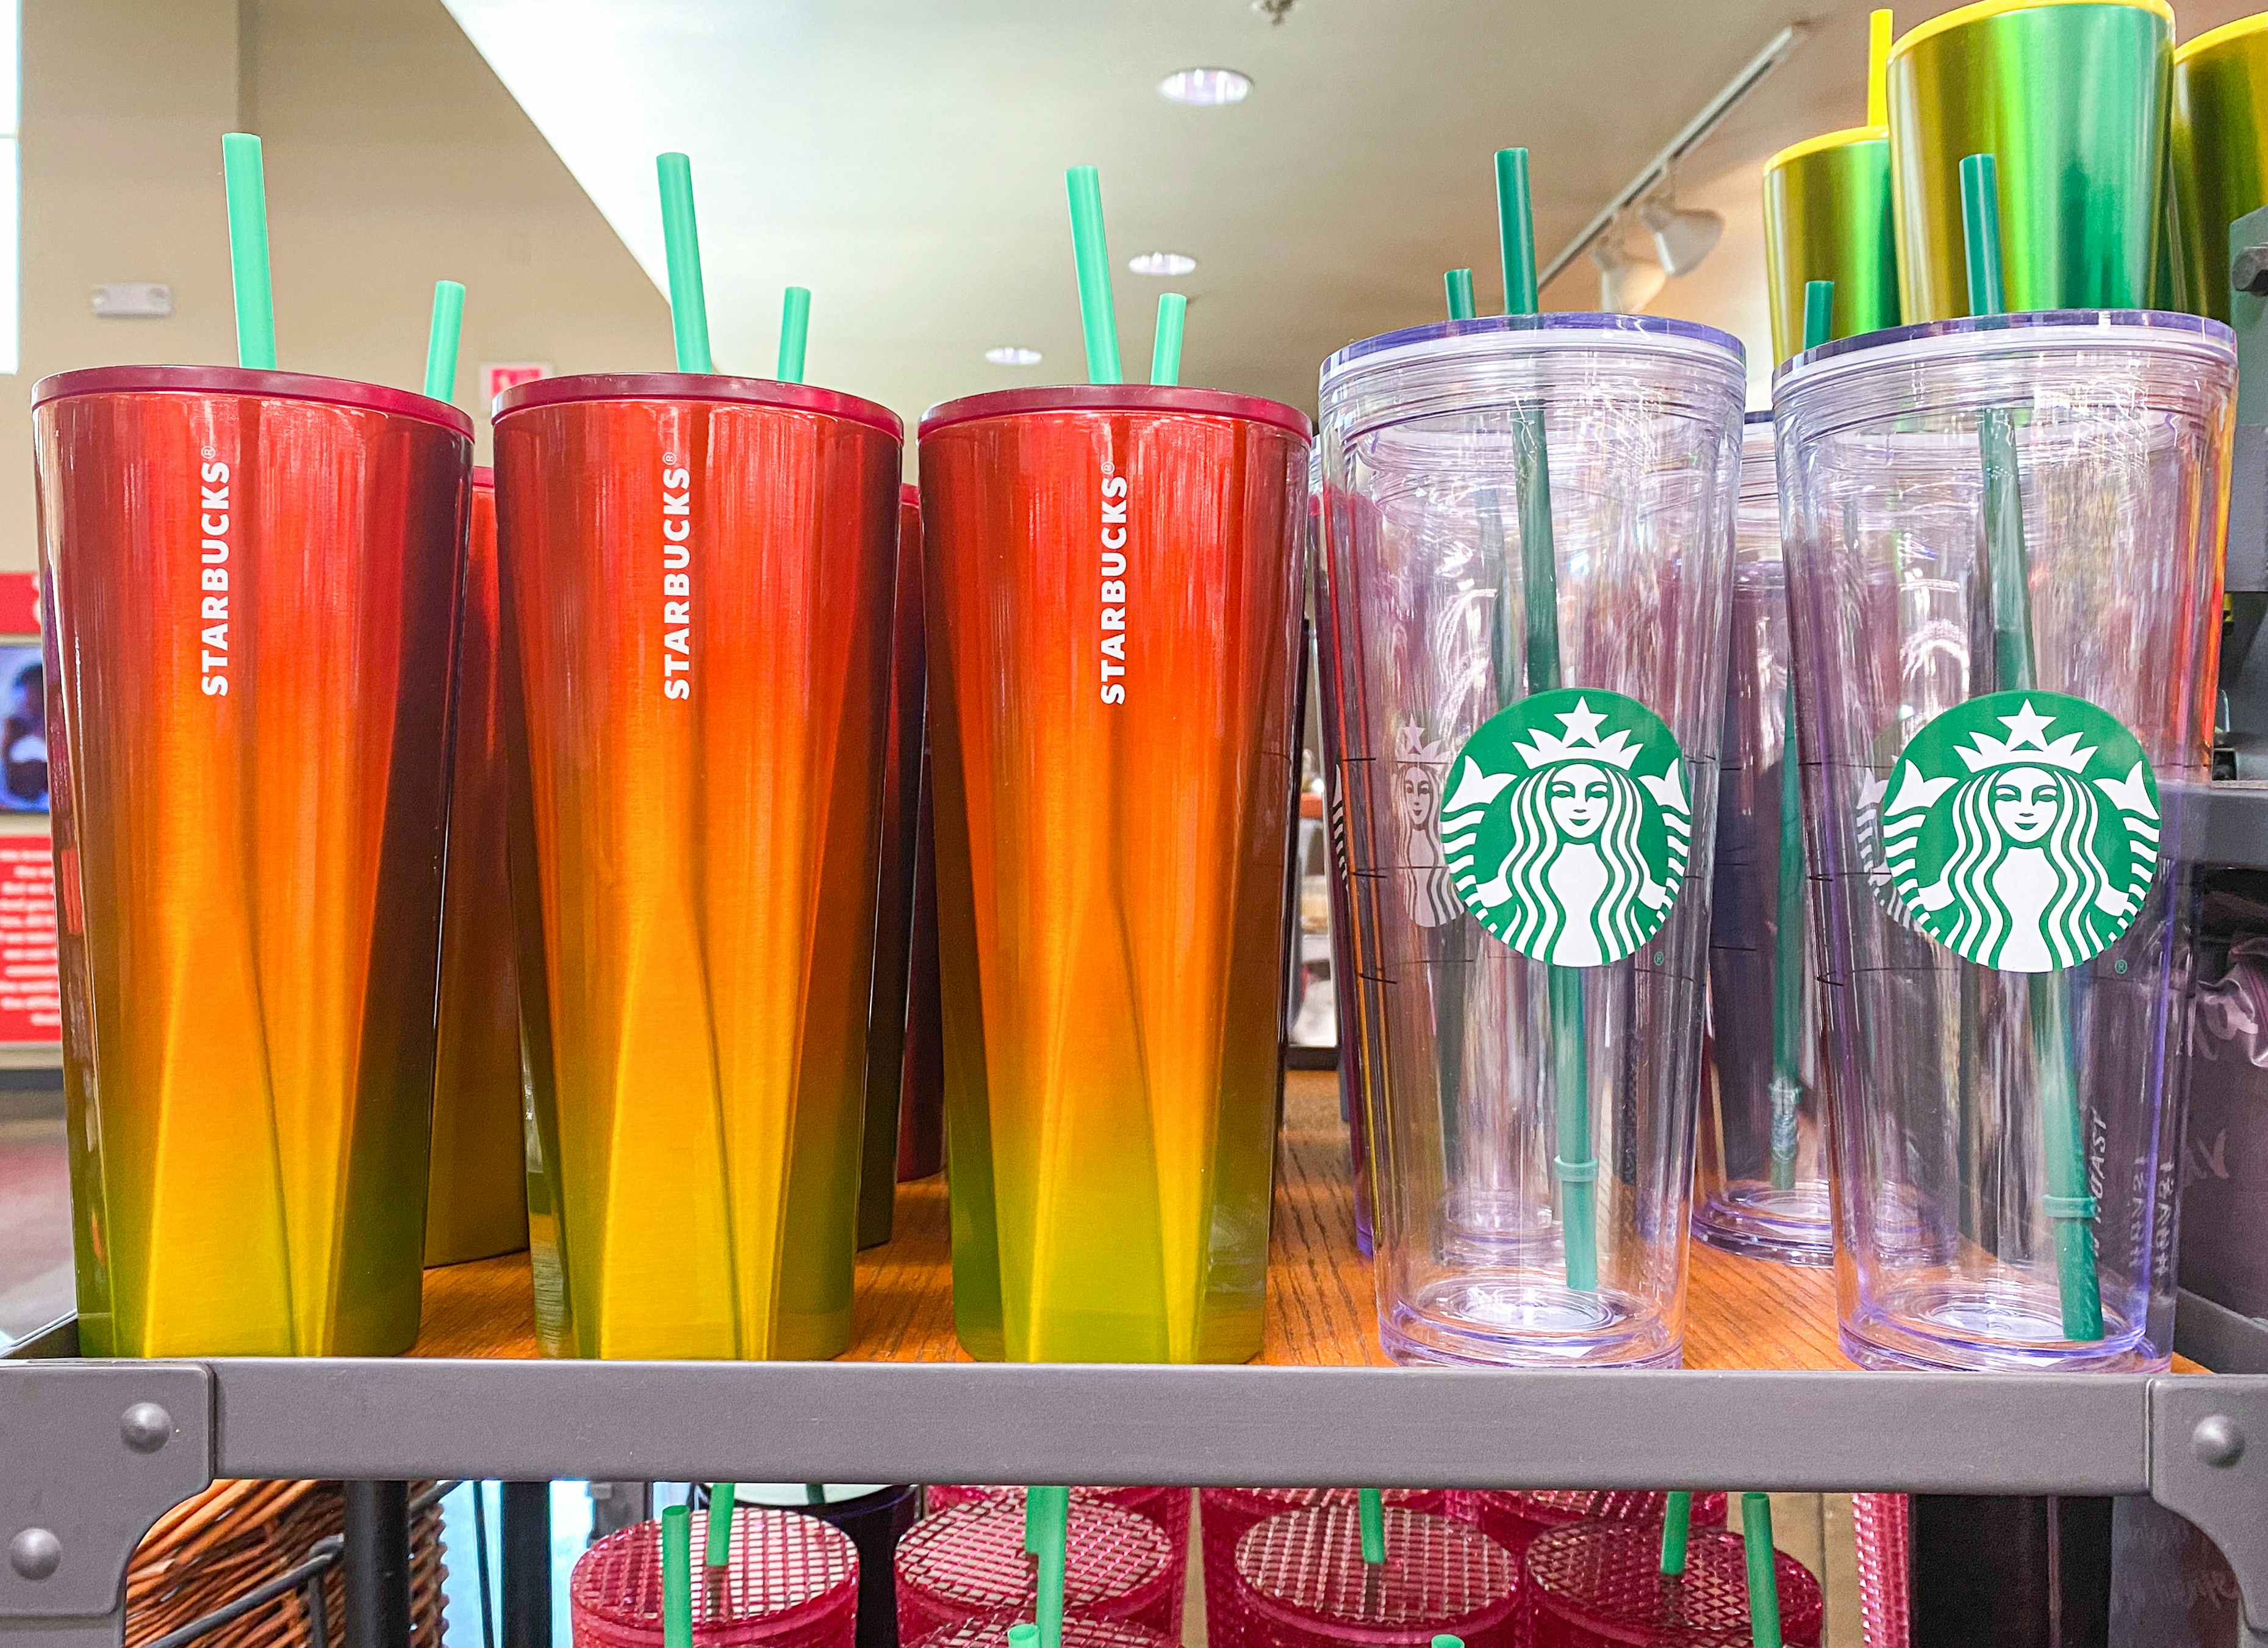 Starbucks Fall Cup Collection Is Showing Up In Stores. Here's A